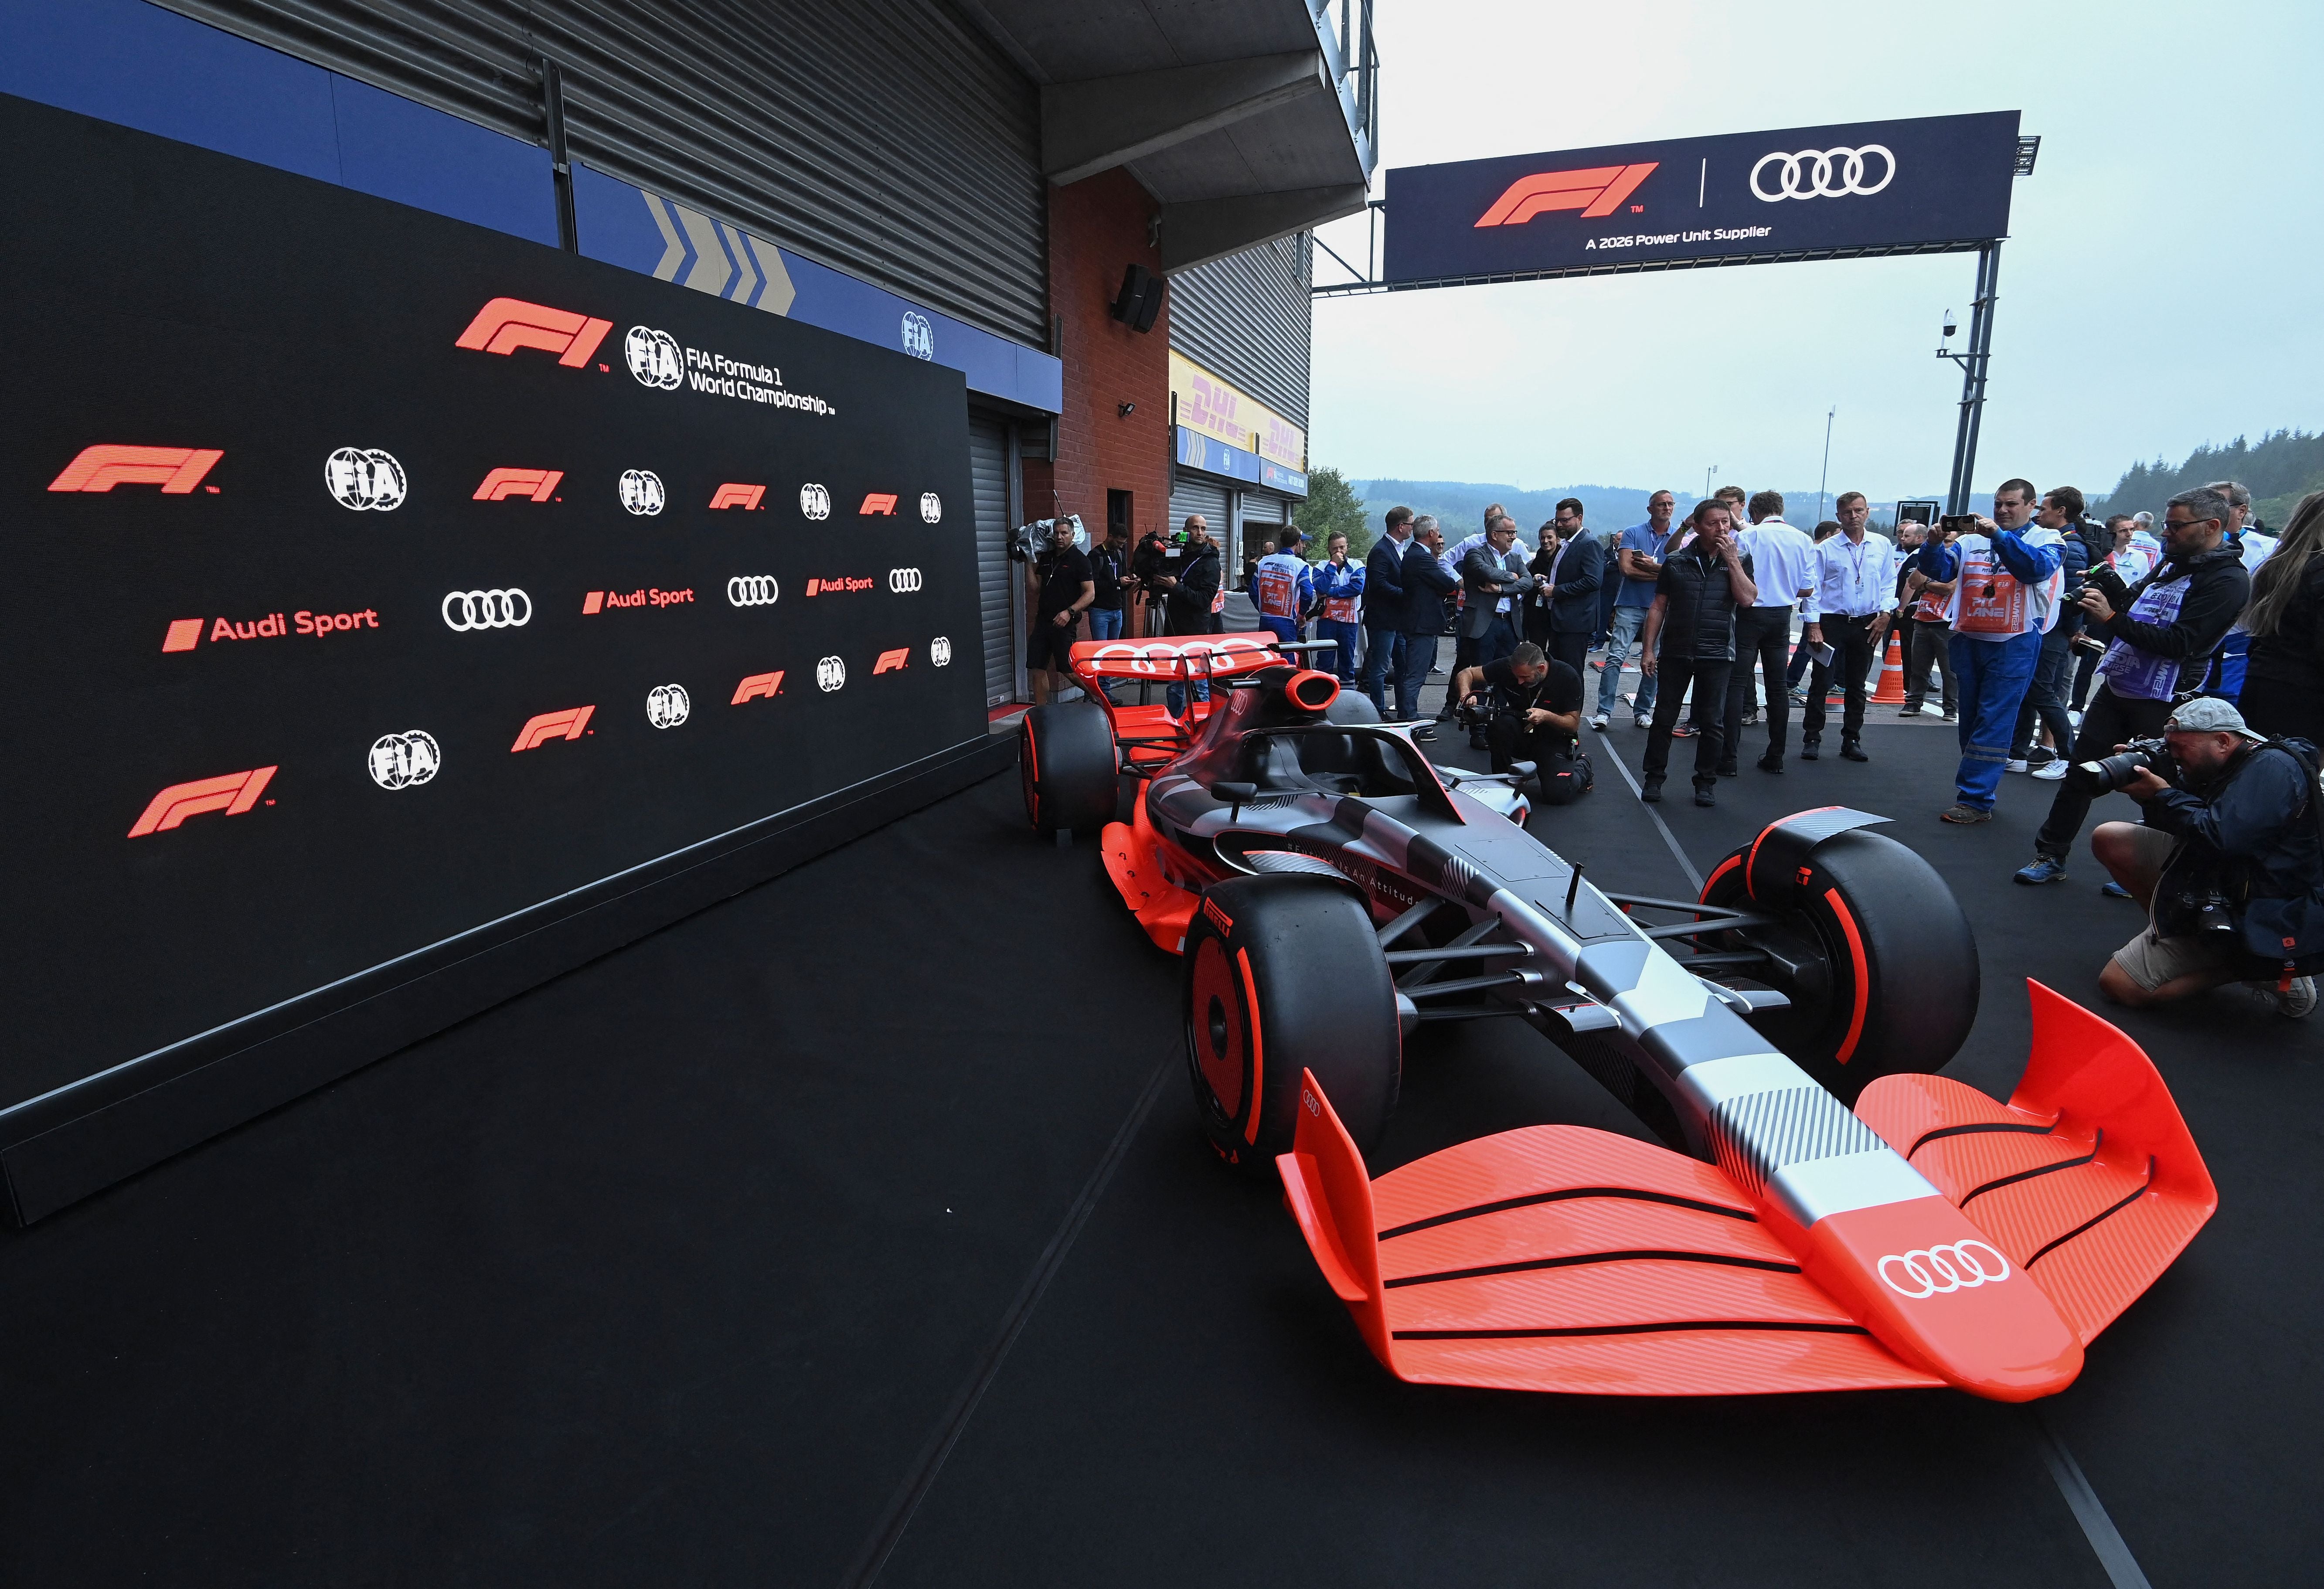 Audi will join Formula 1 from 2026 as a power unit supplier